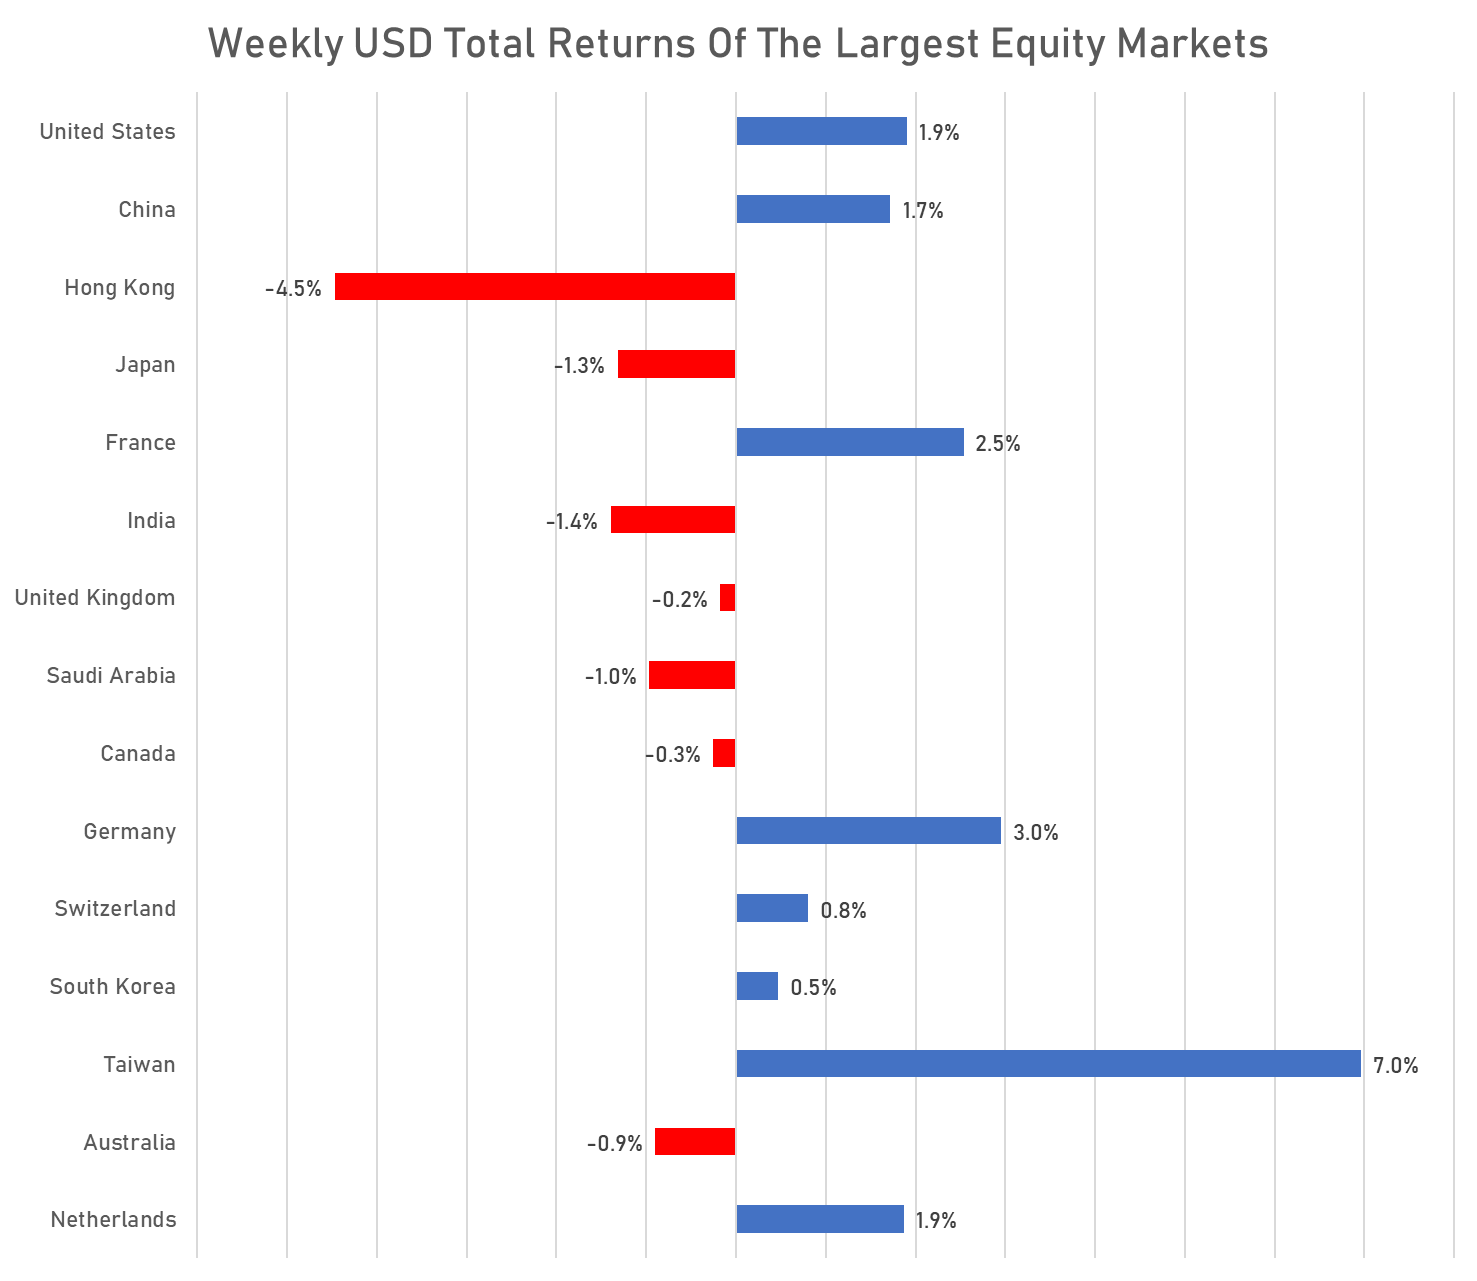 Weekly USD Total Returns For Major Markets | Sources: phipost.com, FactSet data